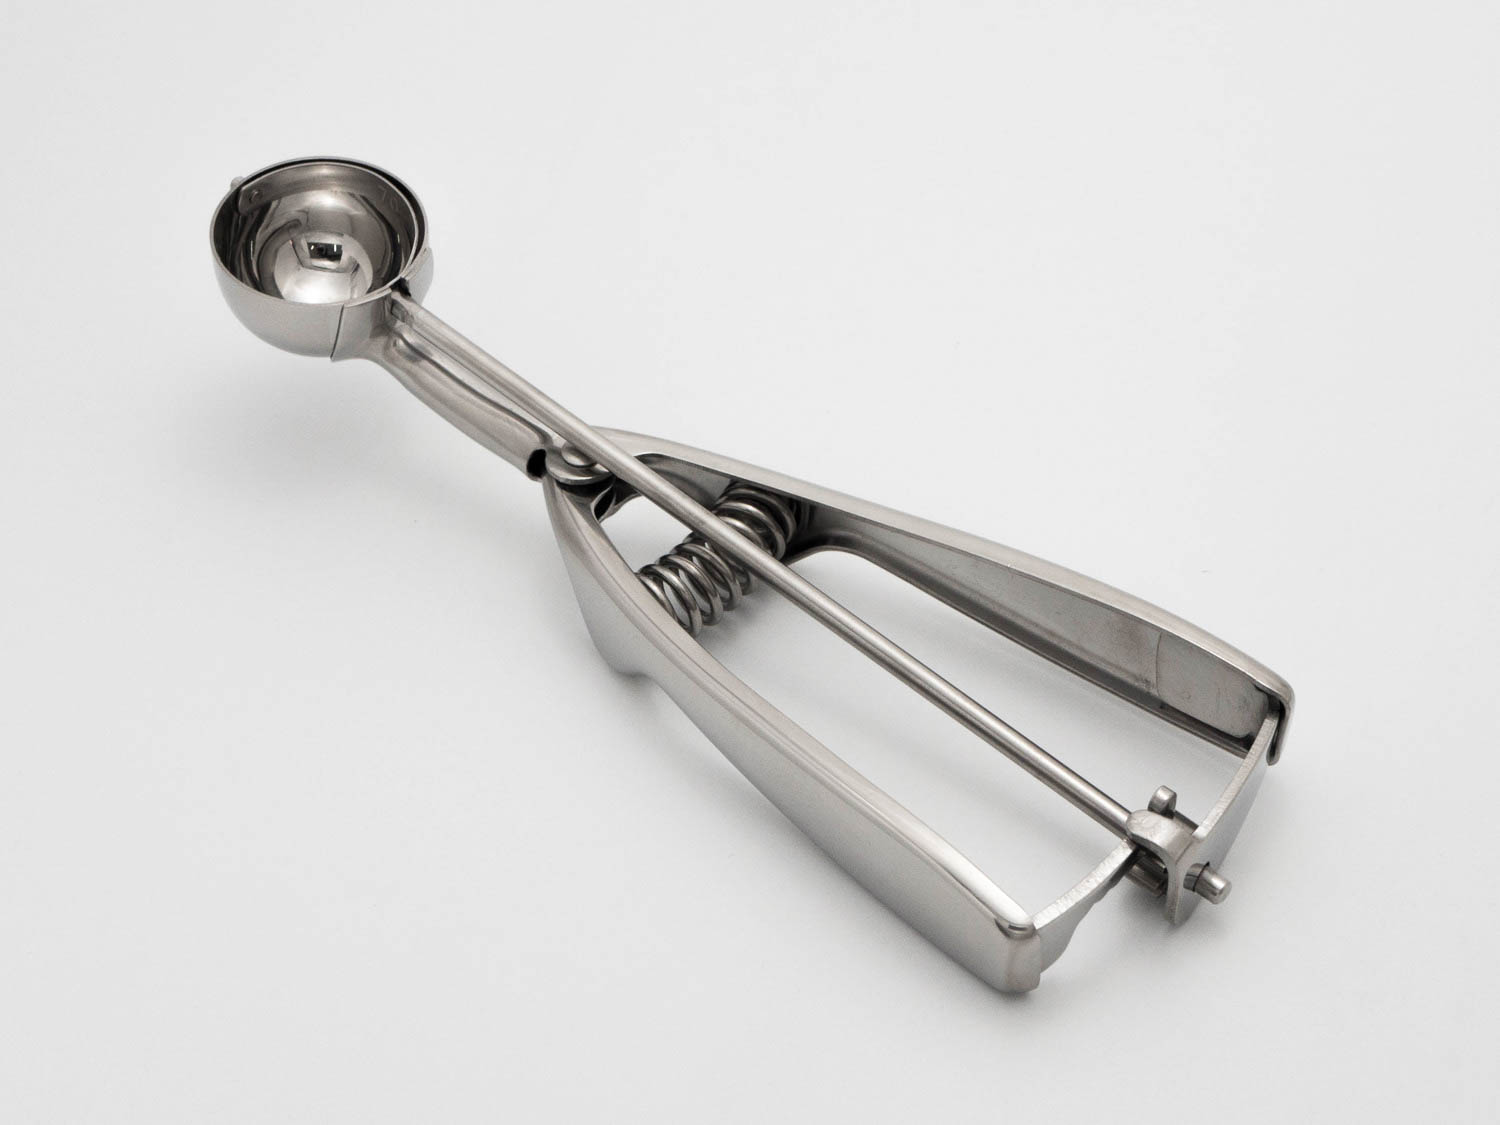 Cookie Scoop 2-1/4 Inch Stainless Steel 18/8 Ice Cream